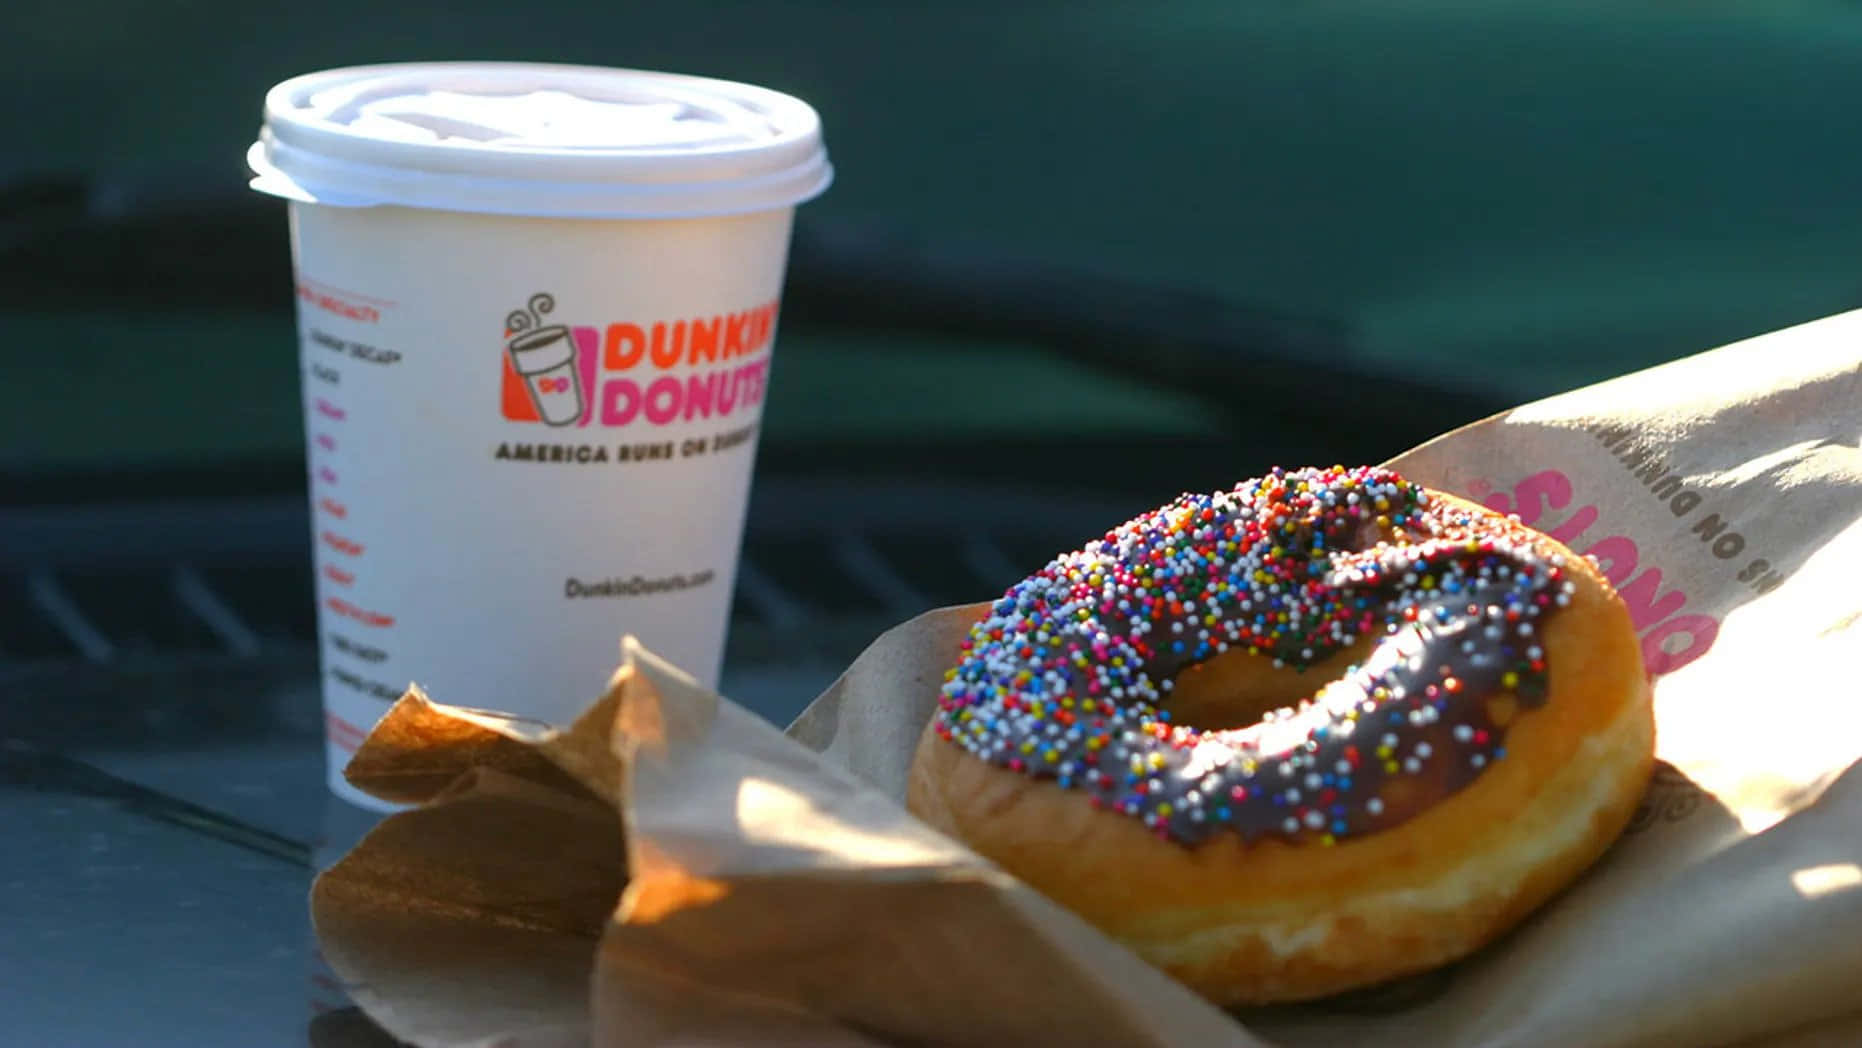 Enjoy delicious donuts from Dunkin'